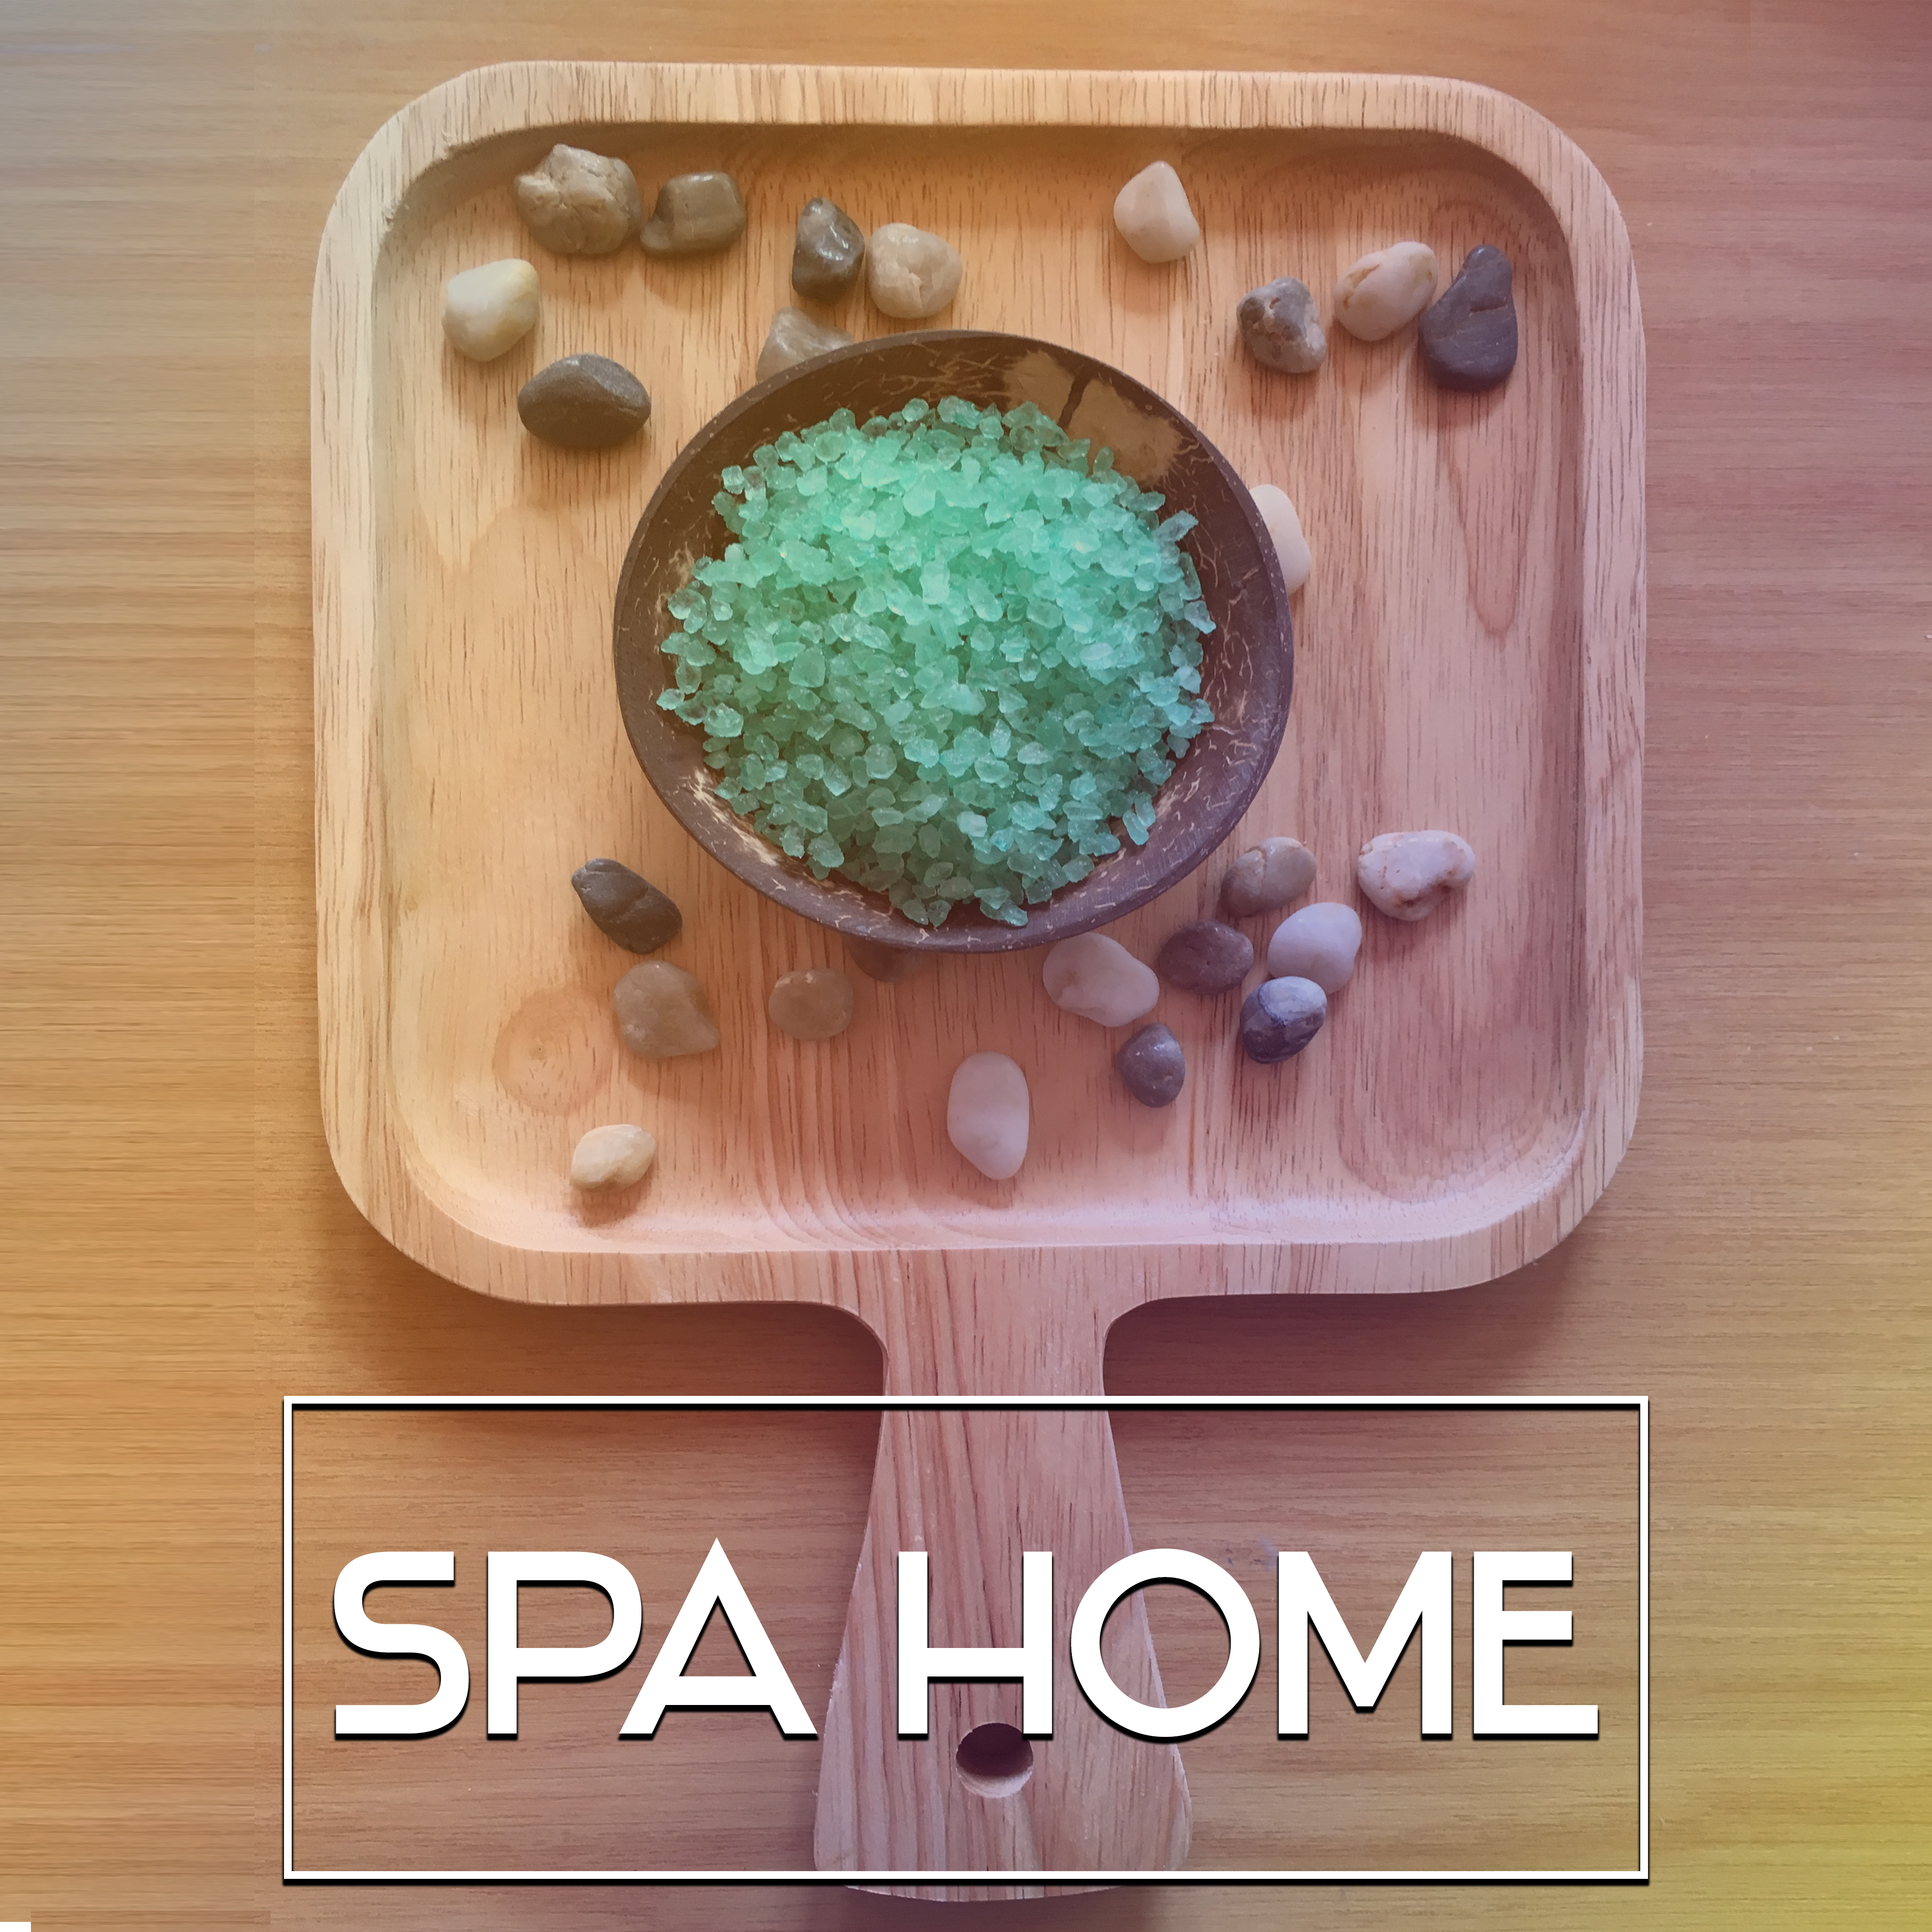 Spa Home - Deep Massage, Relaxing Therapy, Calm Dreams, Deep Relief, Wellness, Spa Music, Nature Sounds to Rest